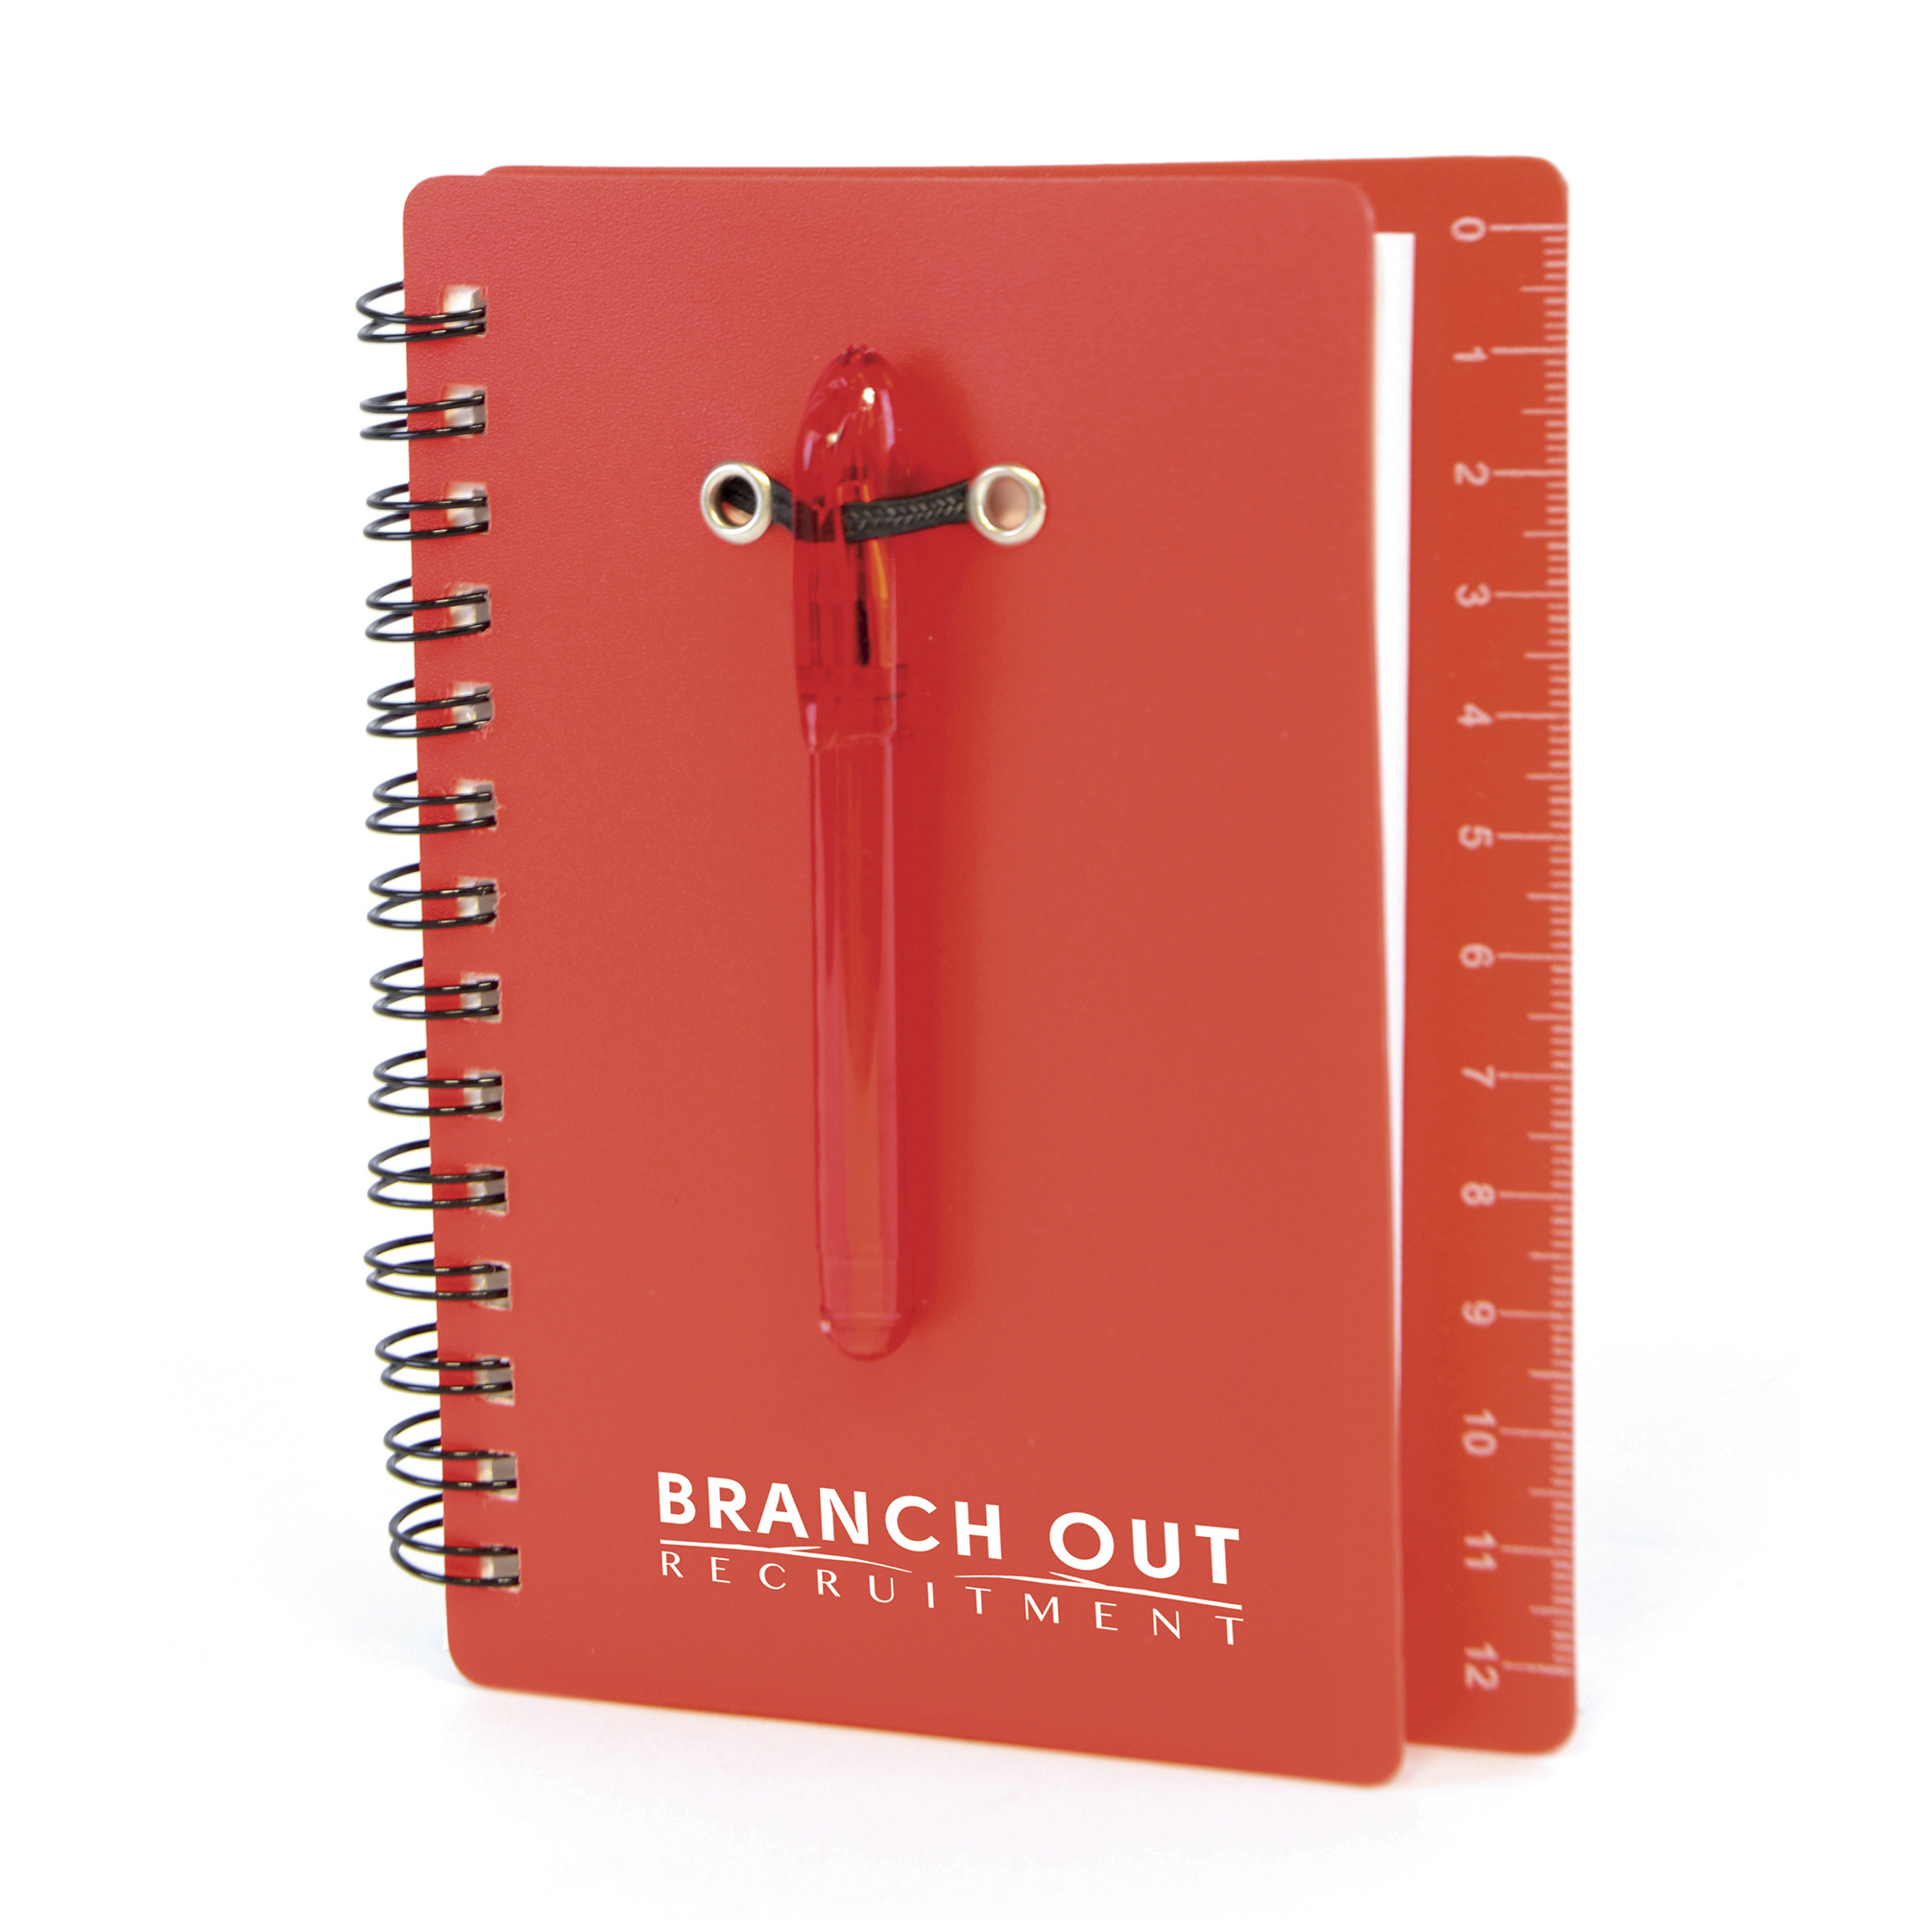 Spiral bound flexible red plastic covered notebook with matching ball pen with back cover ruler